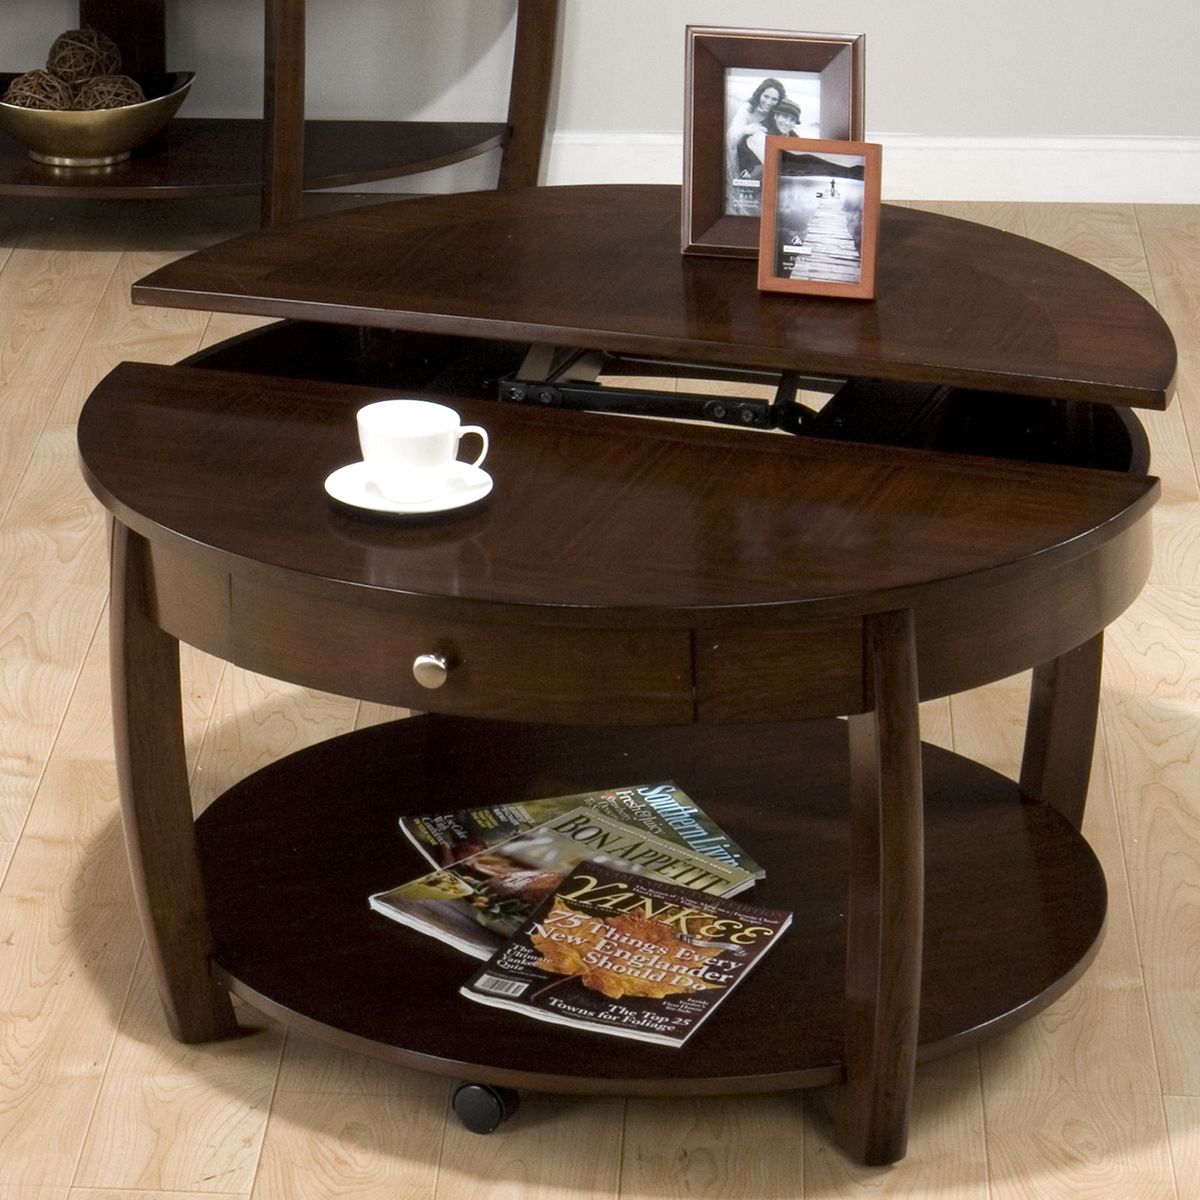 The Round Coffee Tables With Storage – The Simple And Compact Furniture Within Coffee Tables With Open Storage Shelves (Gallery 12 of 20)